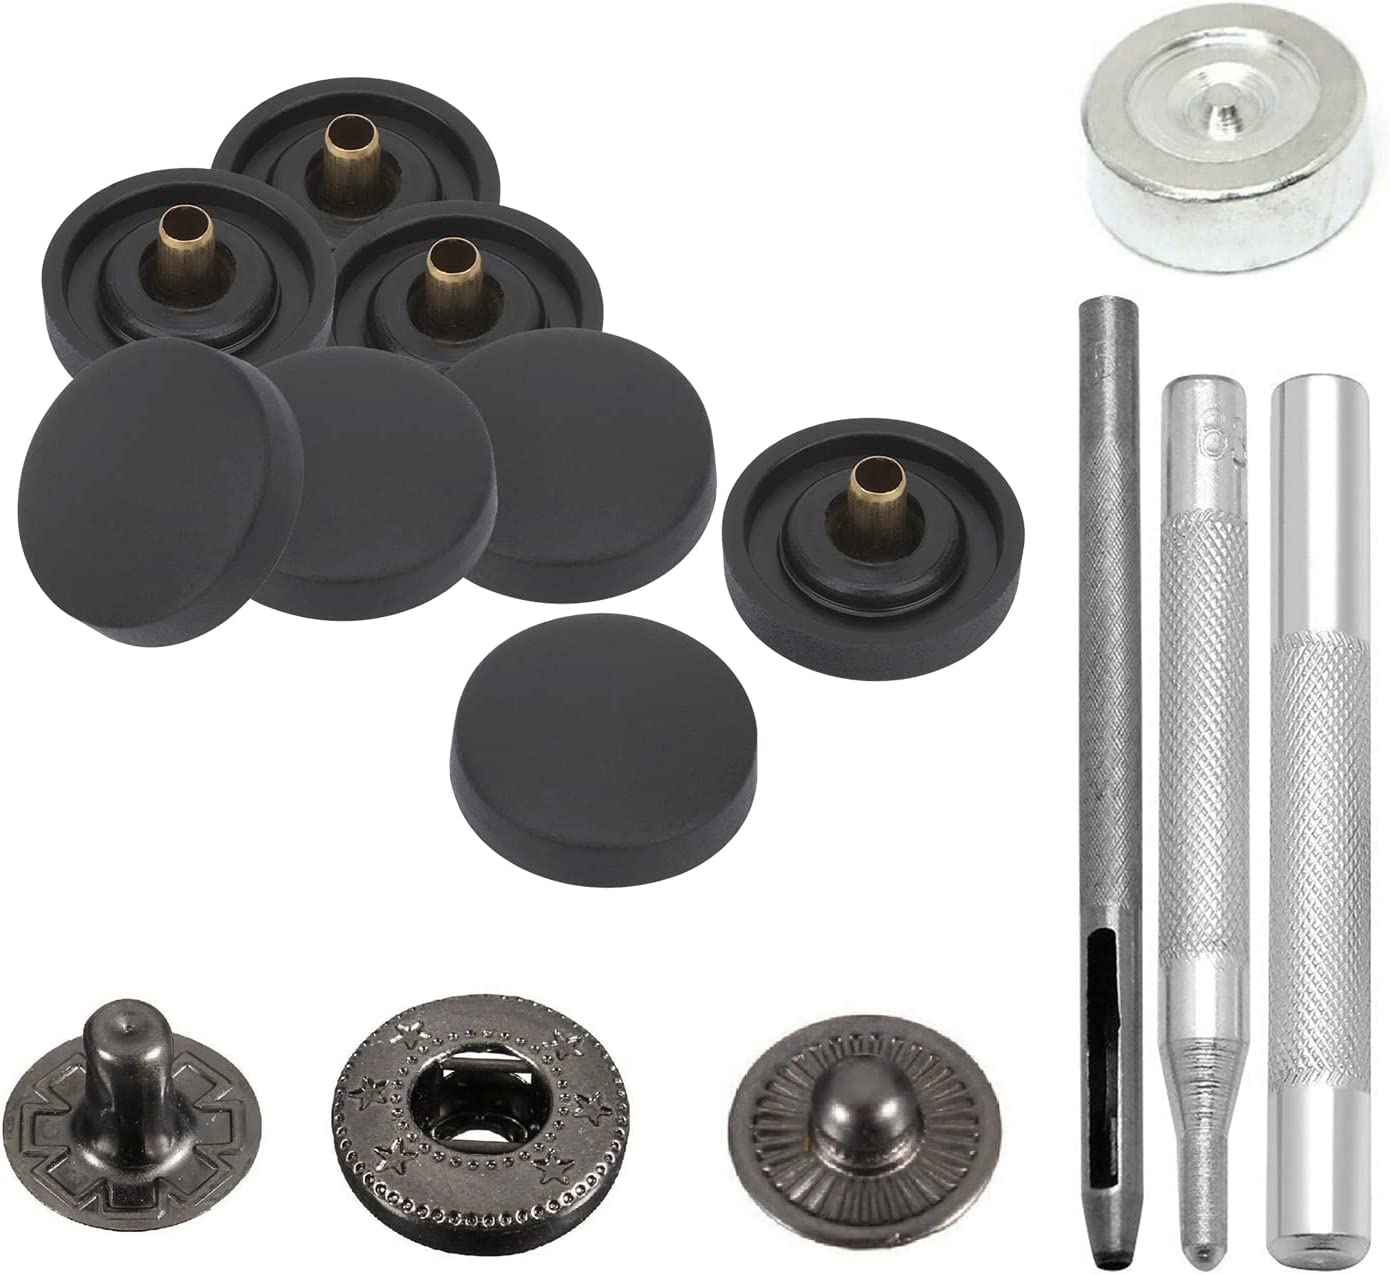 Trimming Shop 15mm S Spring Press Studs Snap Fasteners Plastic Cap with Gunmetal Black Metal Back Snap Buttons - Black, 10pcs, Size: 15mm - with